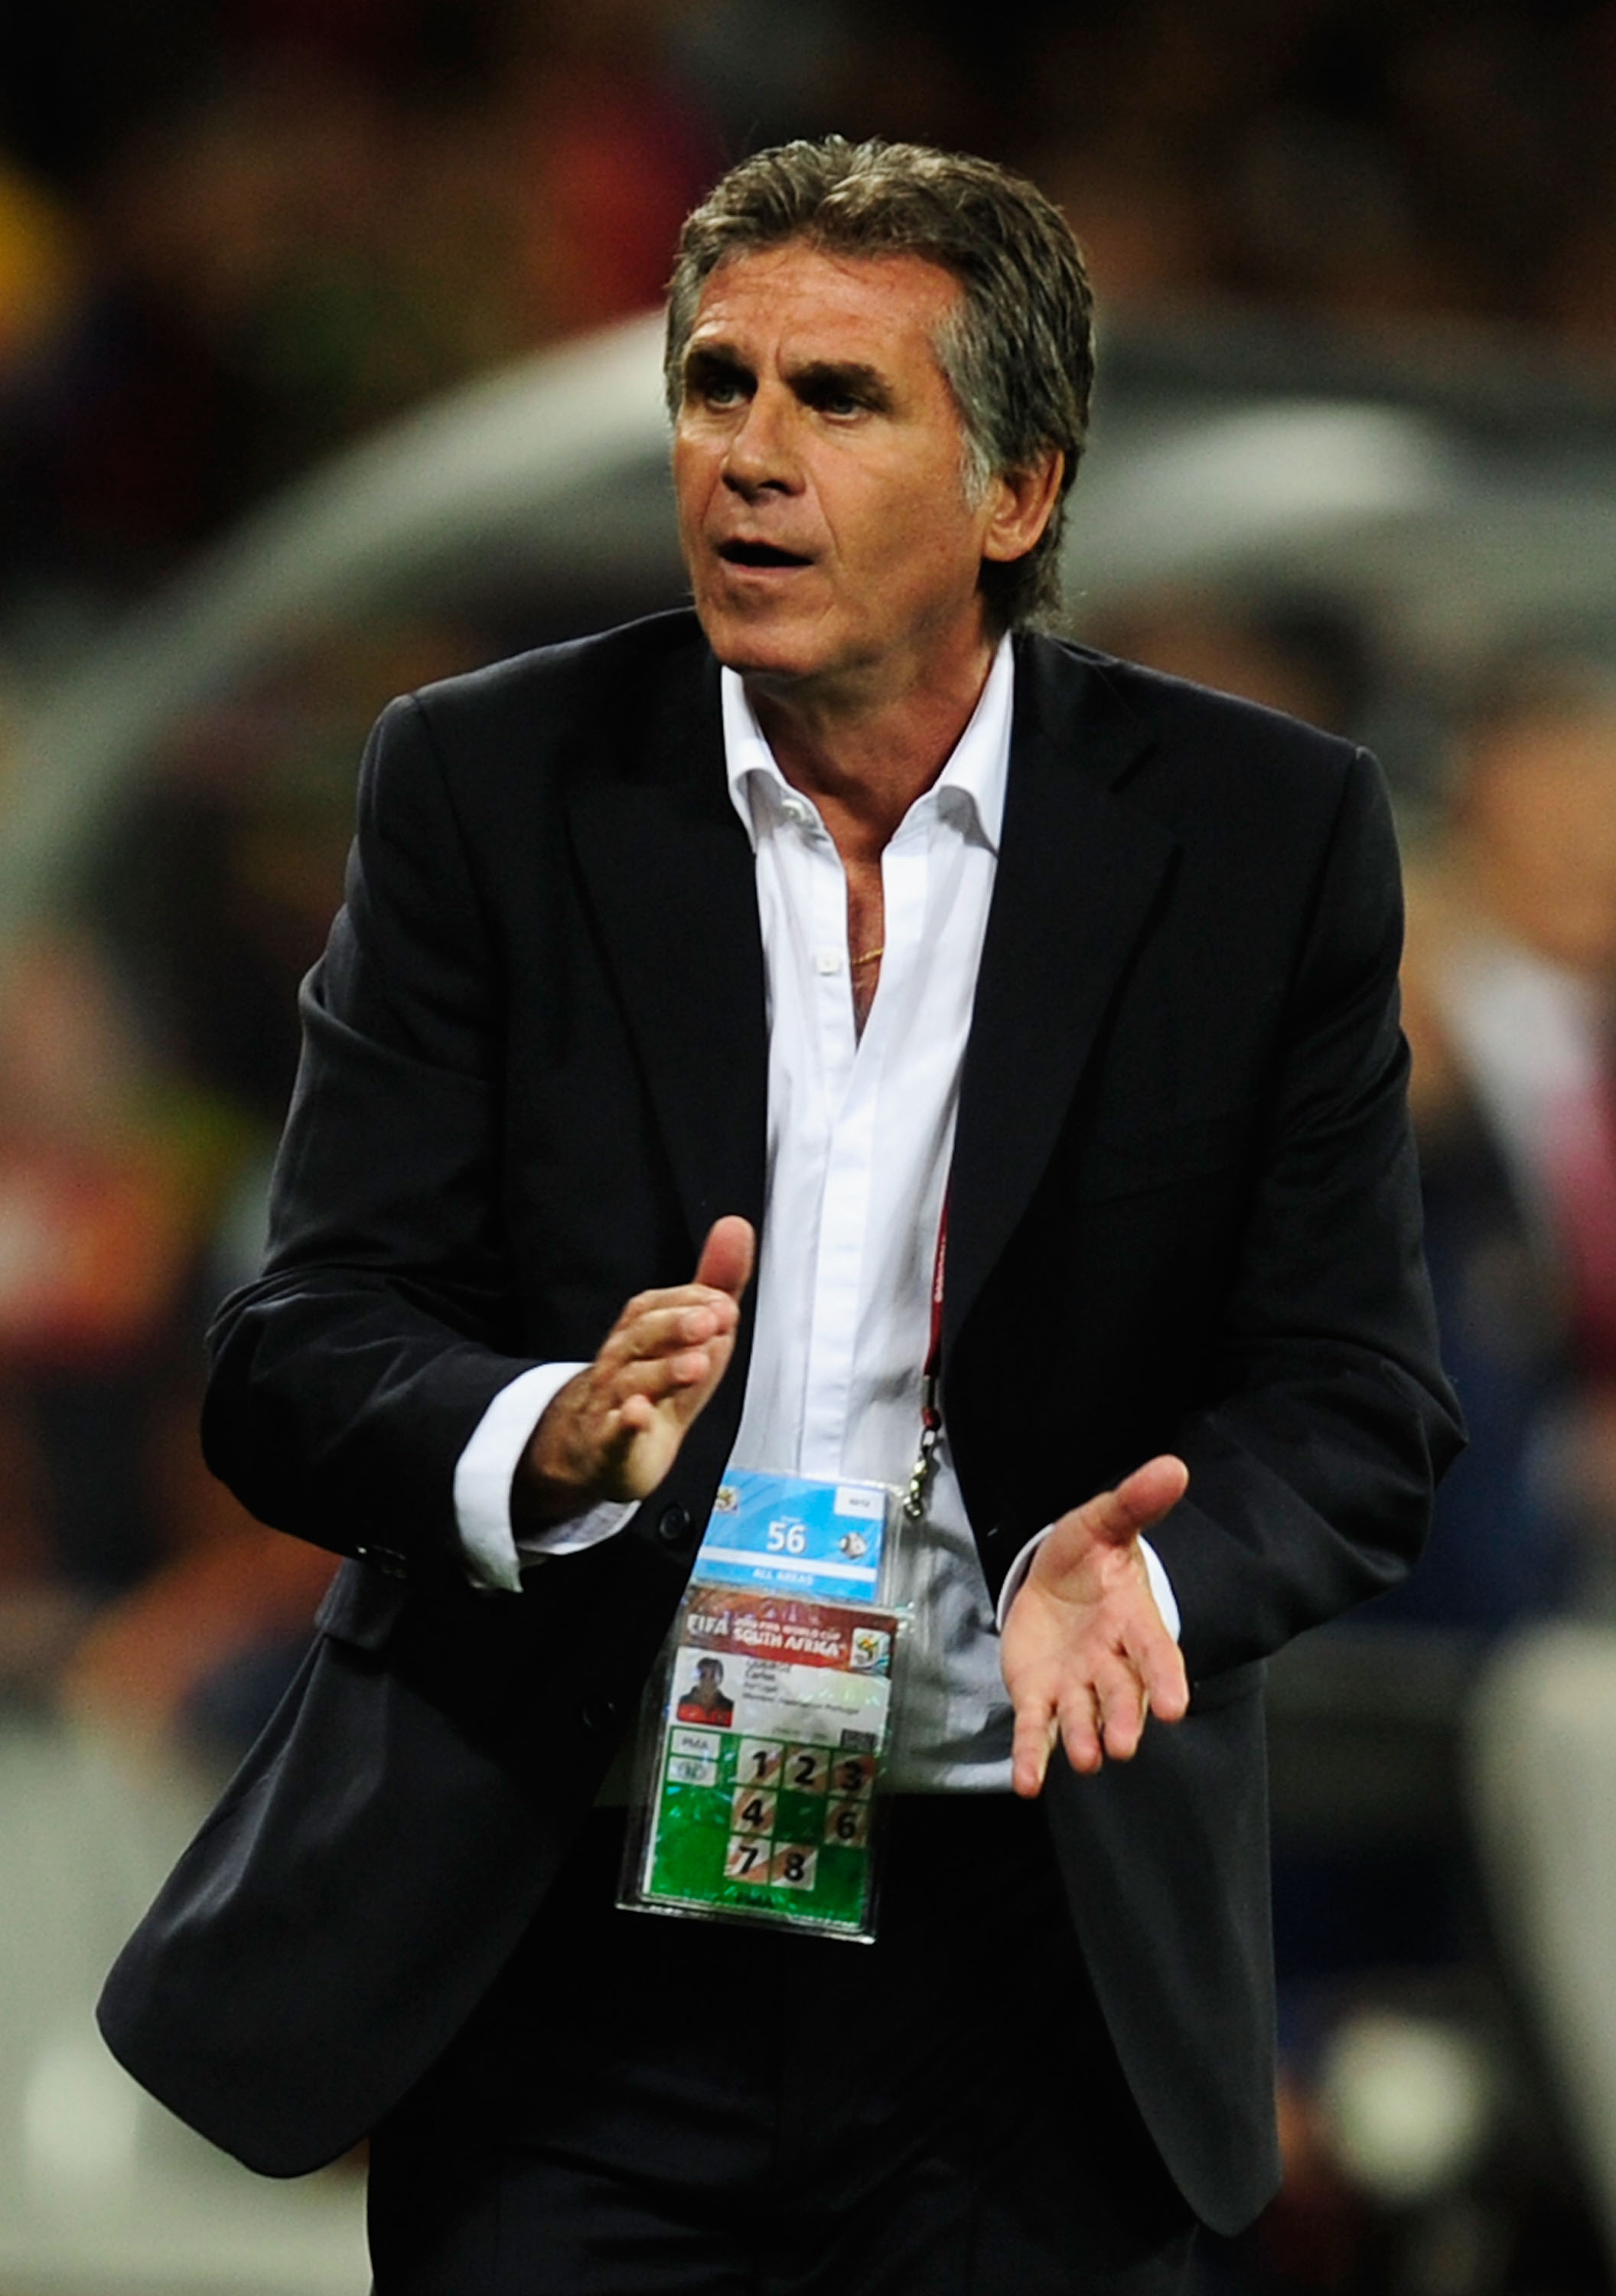 CAPE TOWN, SOUTH AFRICA - JUNE 29:  Carlos Queiroz head coach of Portugal gestures on the touchline during the 2010 FIFA World Cup South Africa Round of Sixteen match between Spain and Portugal at Green Point Stadium on June 29, 2010 in Cape Town, South A